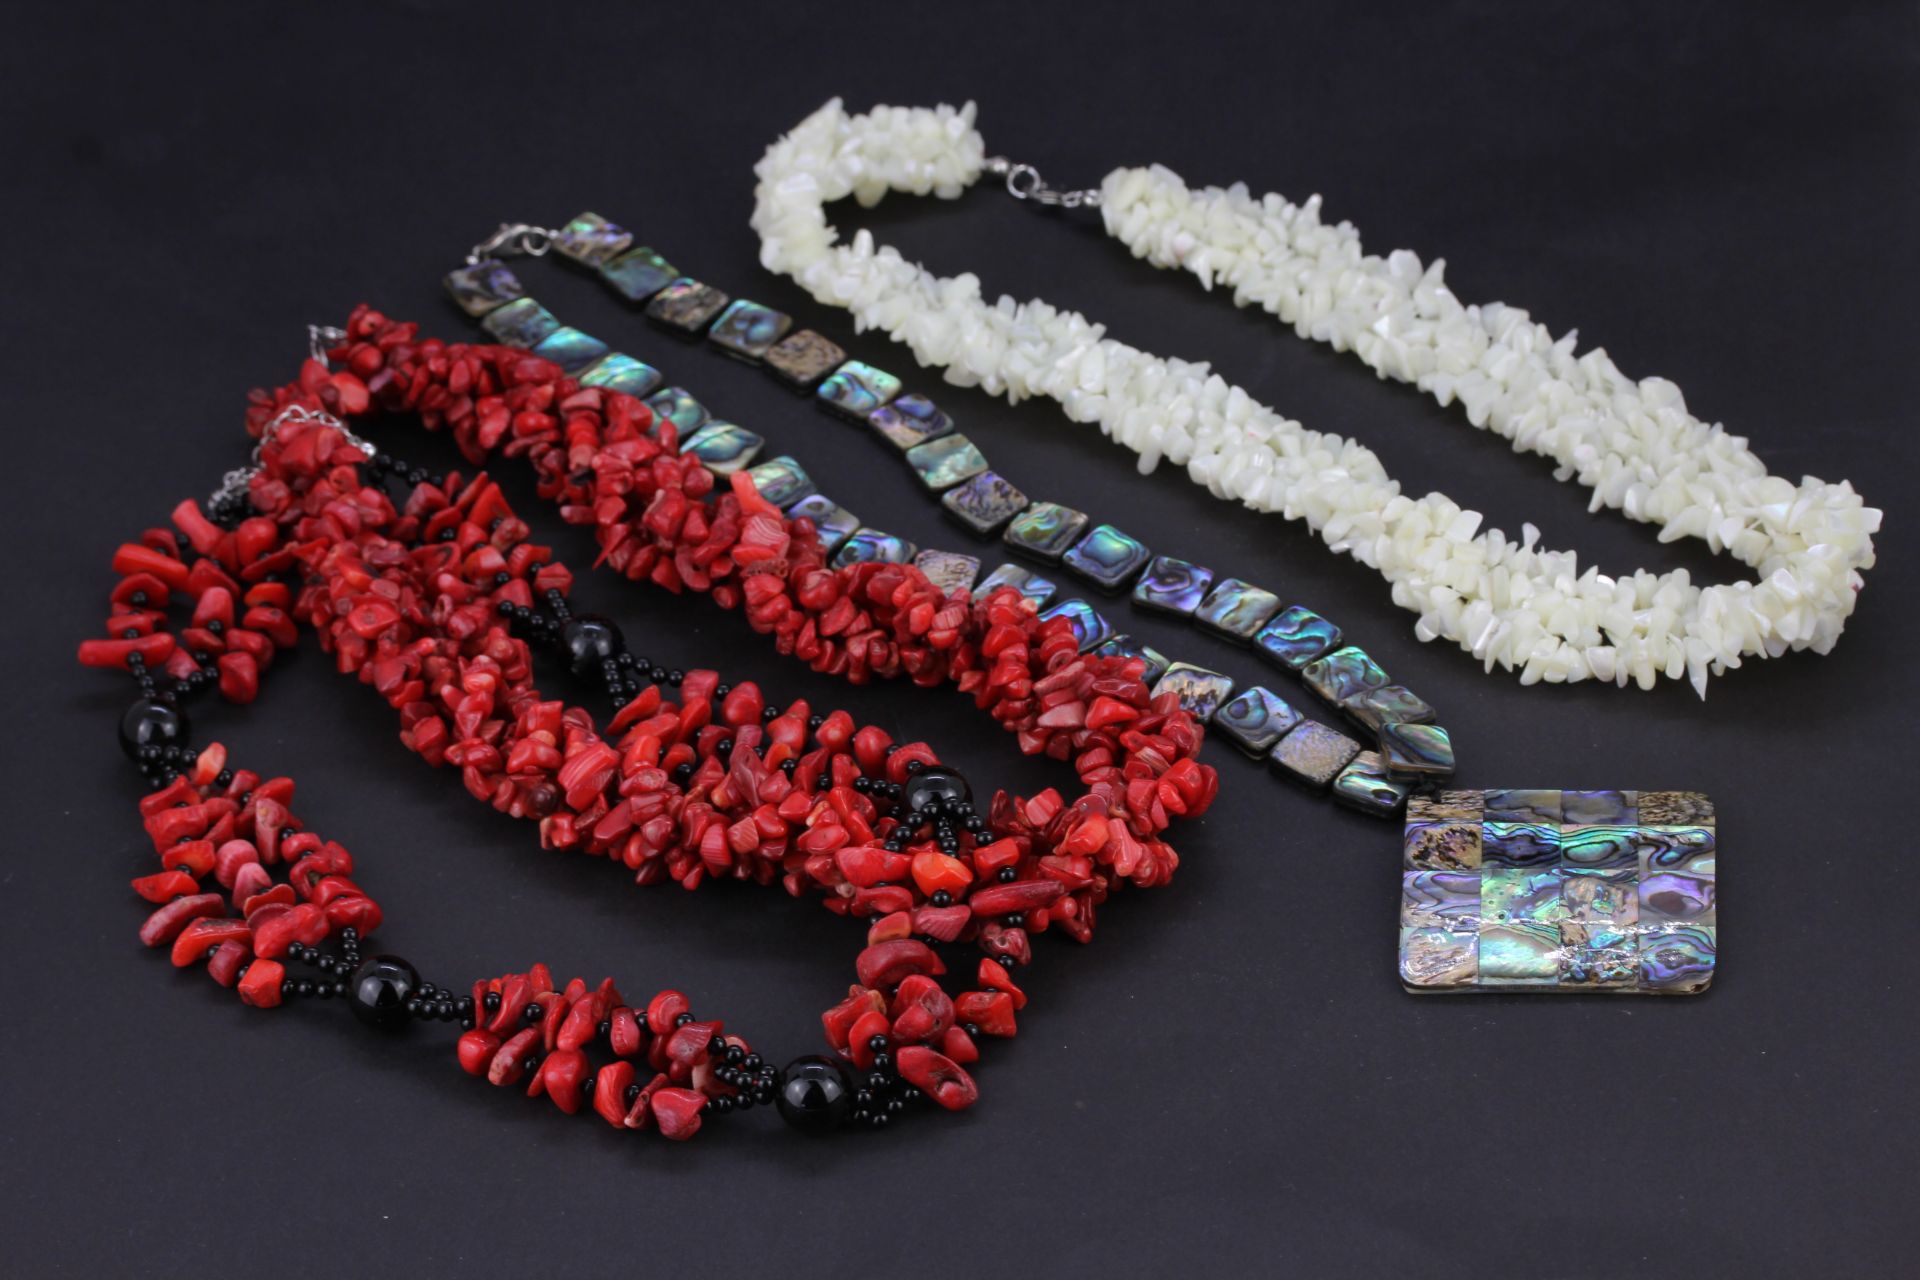 Two coral necklaces and two mother of pearl necklaces.